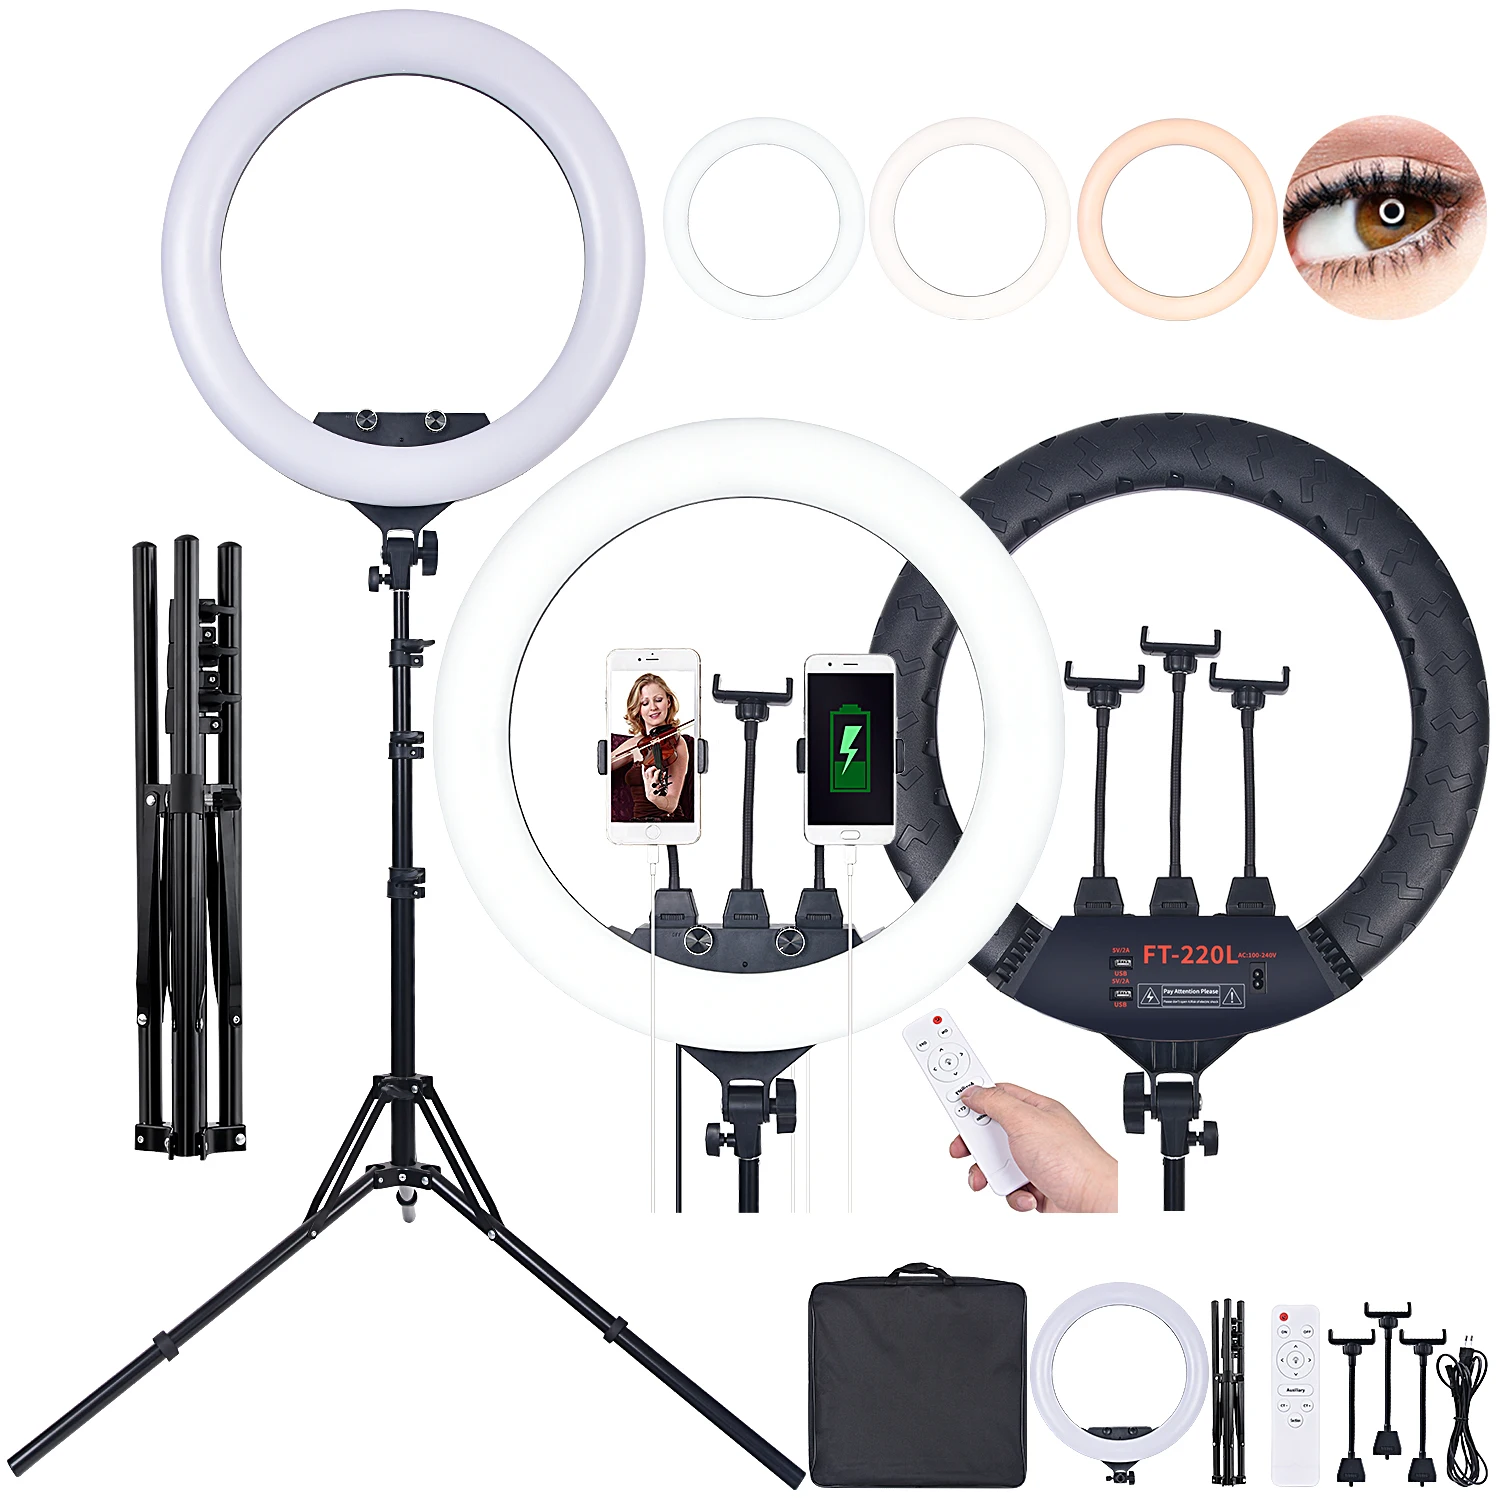 

FOSOTO FT-220L 22 inch Ring Light Led Ring Lamp Photographic lighting Tik Tok LED Ringlight With 1.8M Tripod Stand For Makeup